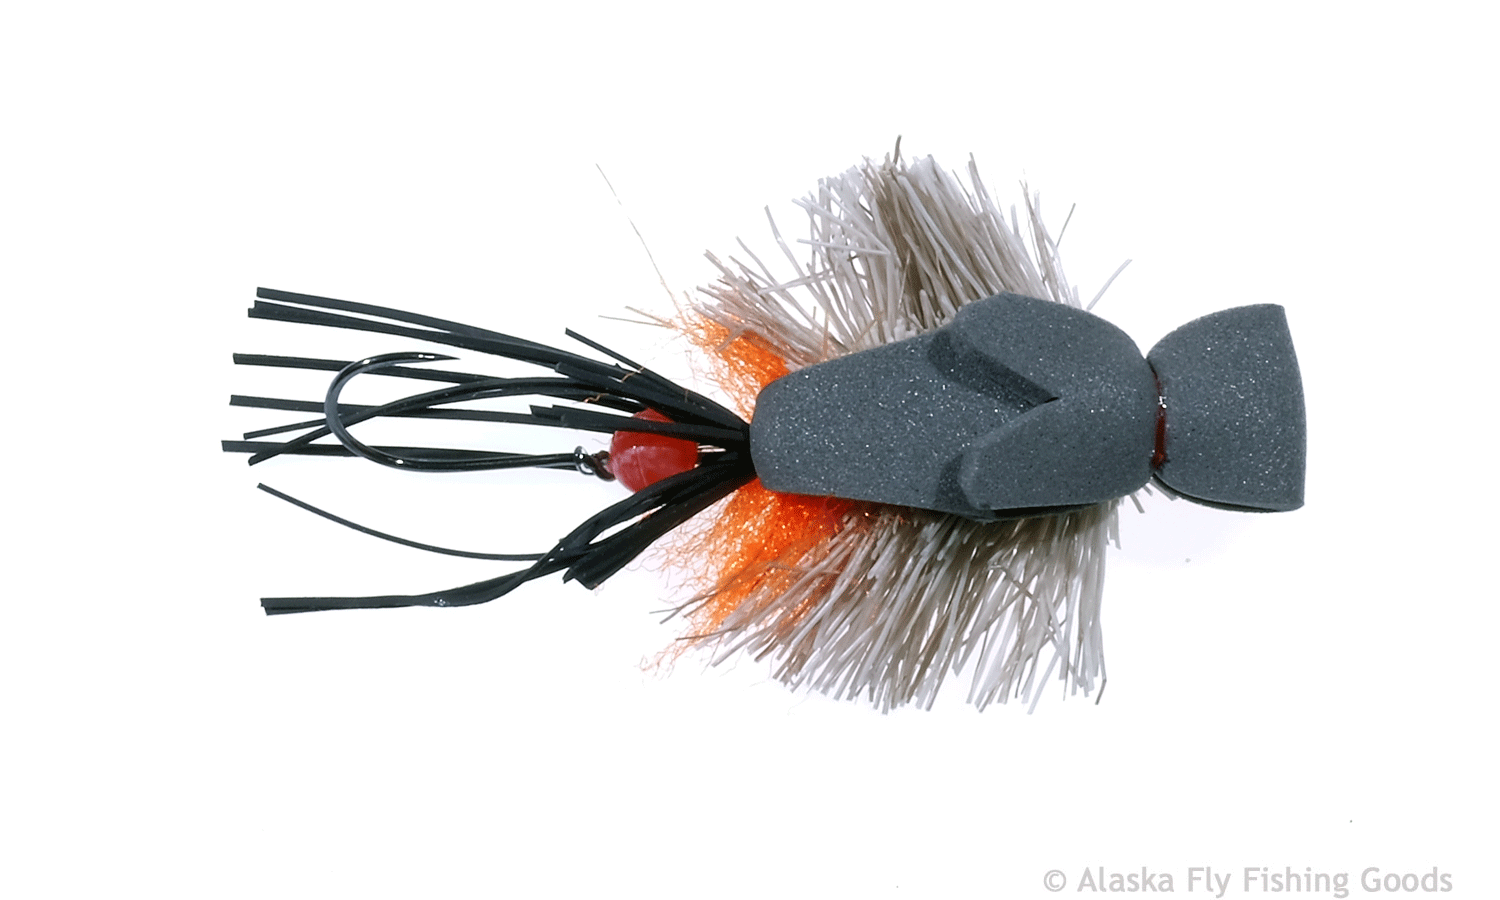 https://www.alaskaflyfishinggoods.com/wp-content/uploads/product_images/bobs-mouse.gif